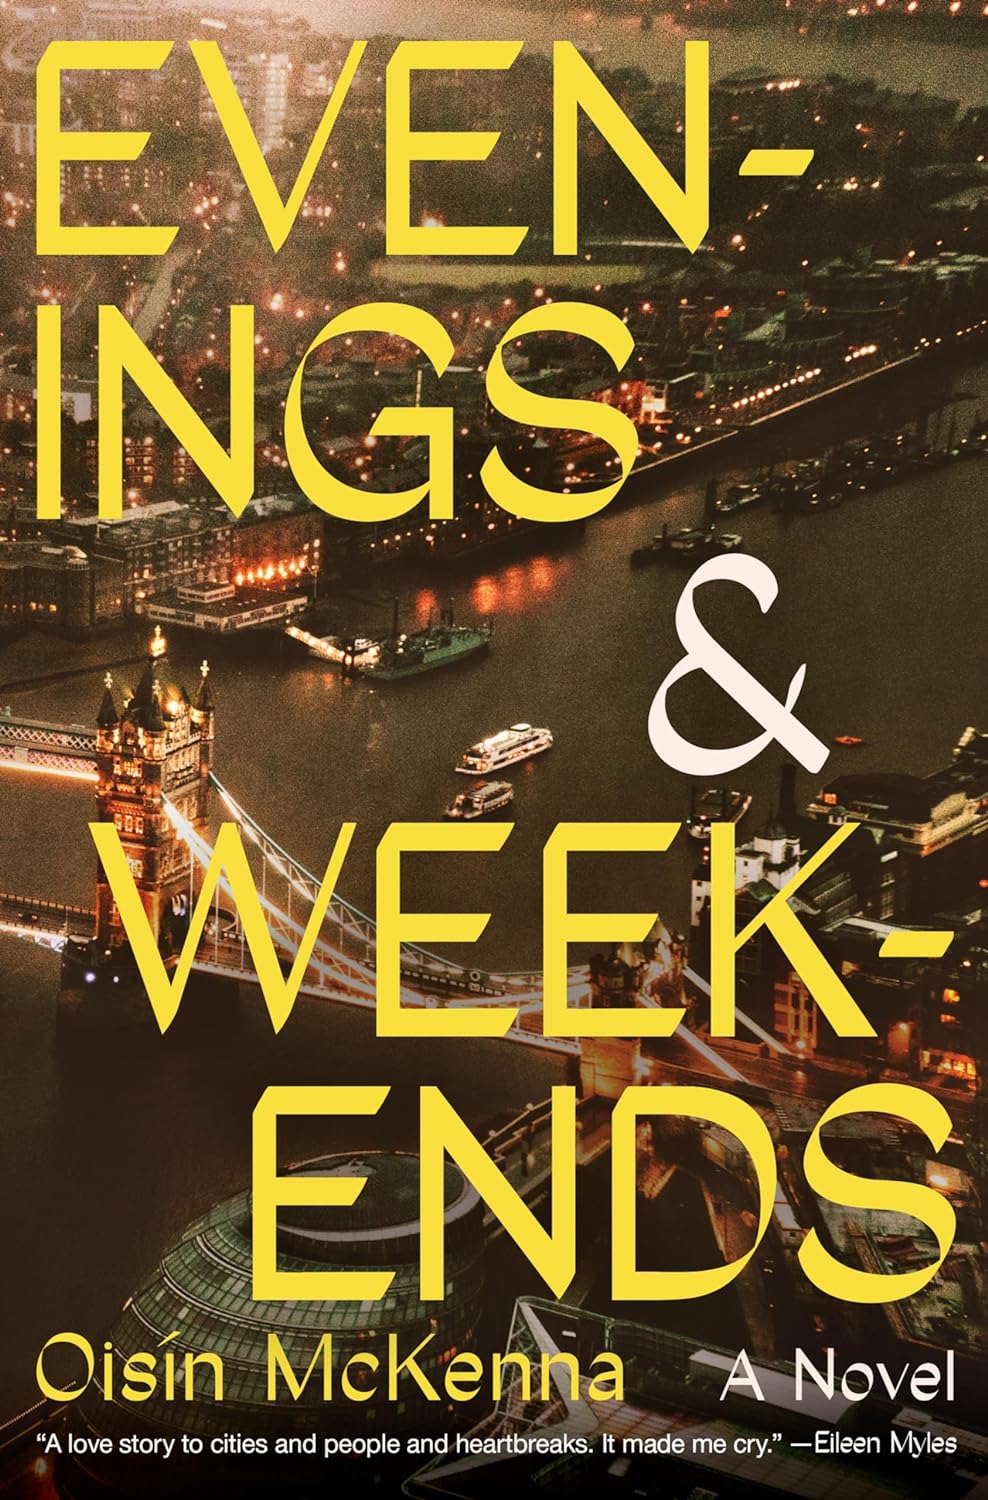 Image for "Evenings and Weekends"